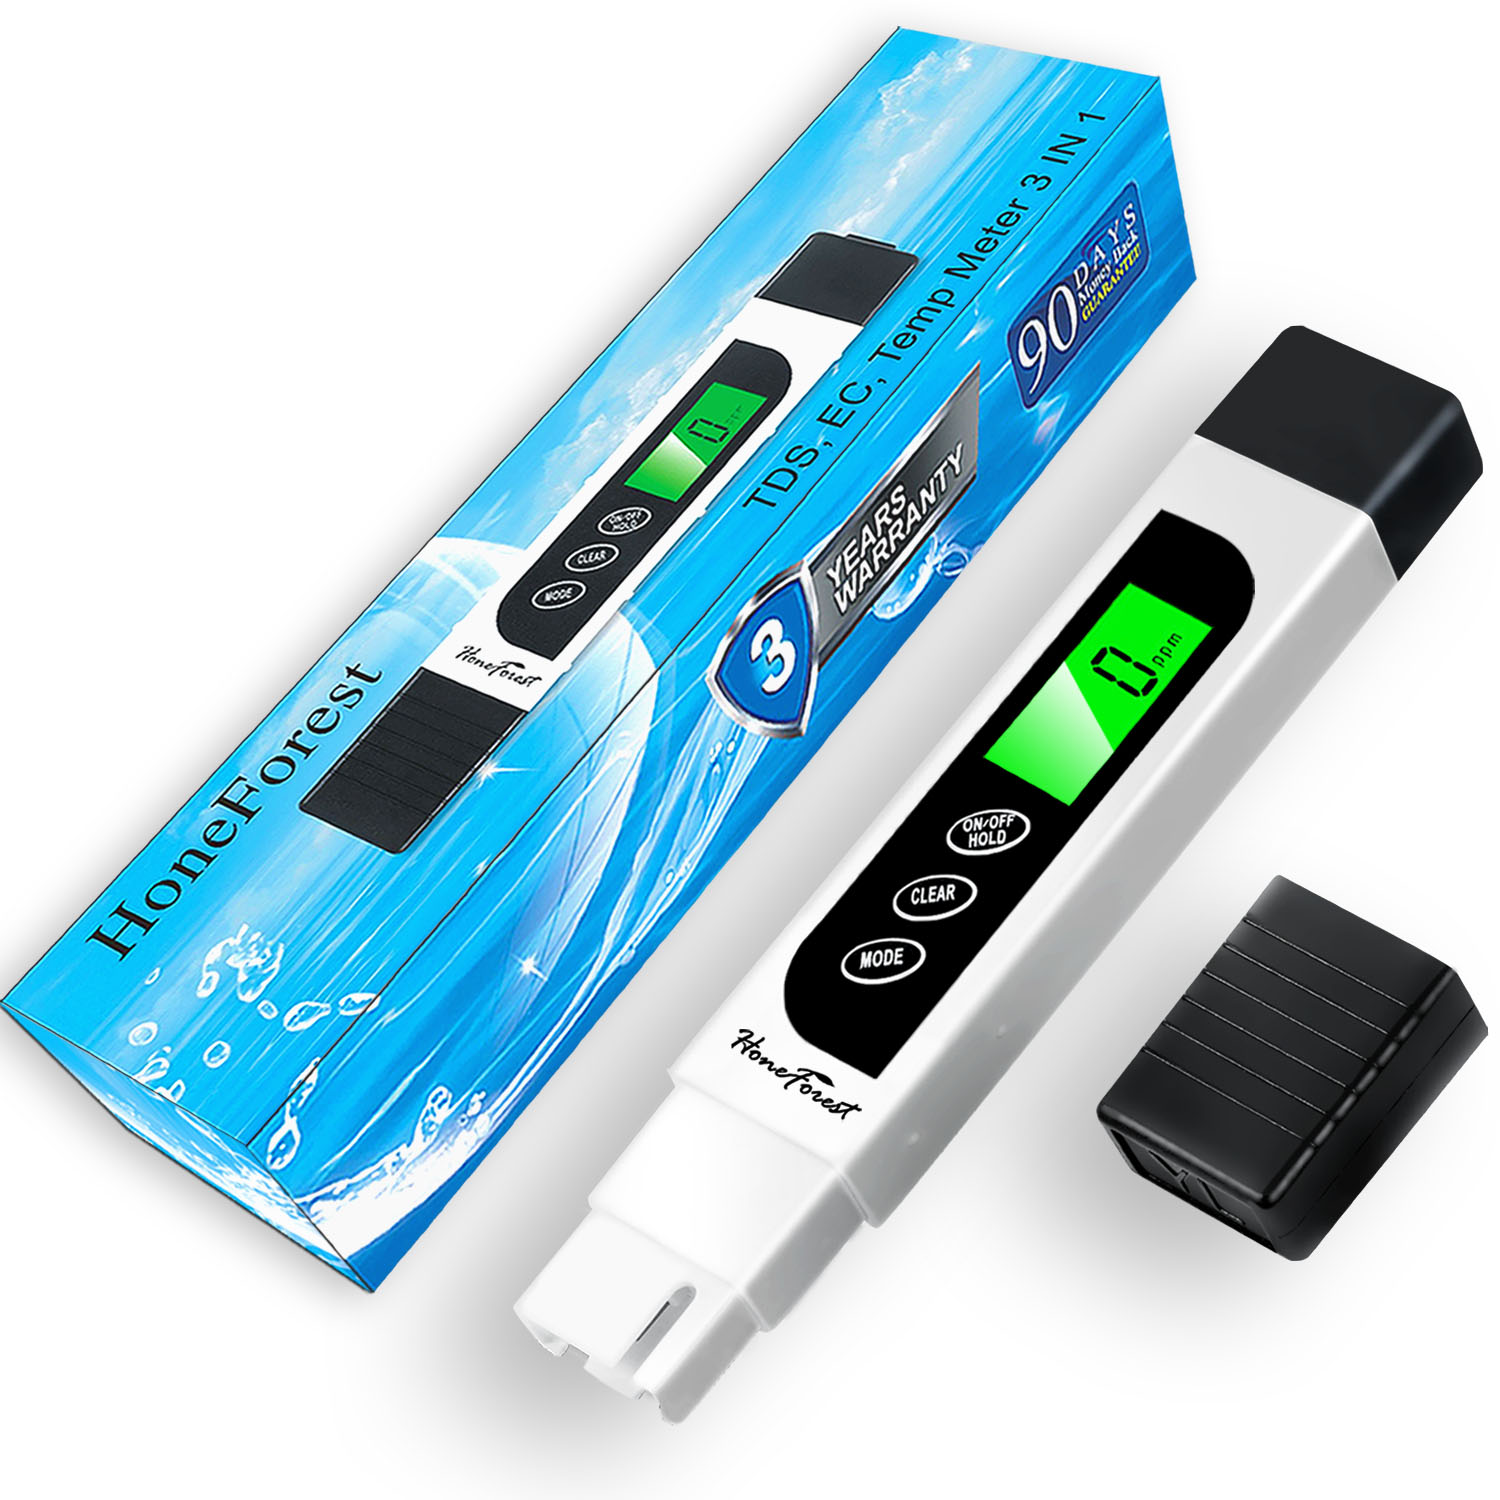 pH Monitor Digital pH Meter&Temperature Meter Water Quality Tester with ATC  and Automatic Calibration Function, pH Tester for hydroponics, Aquarium